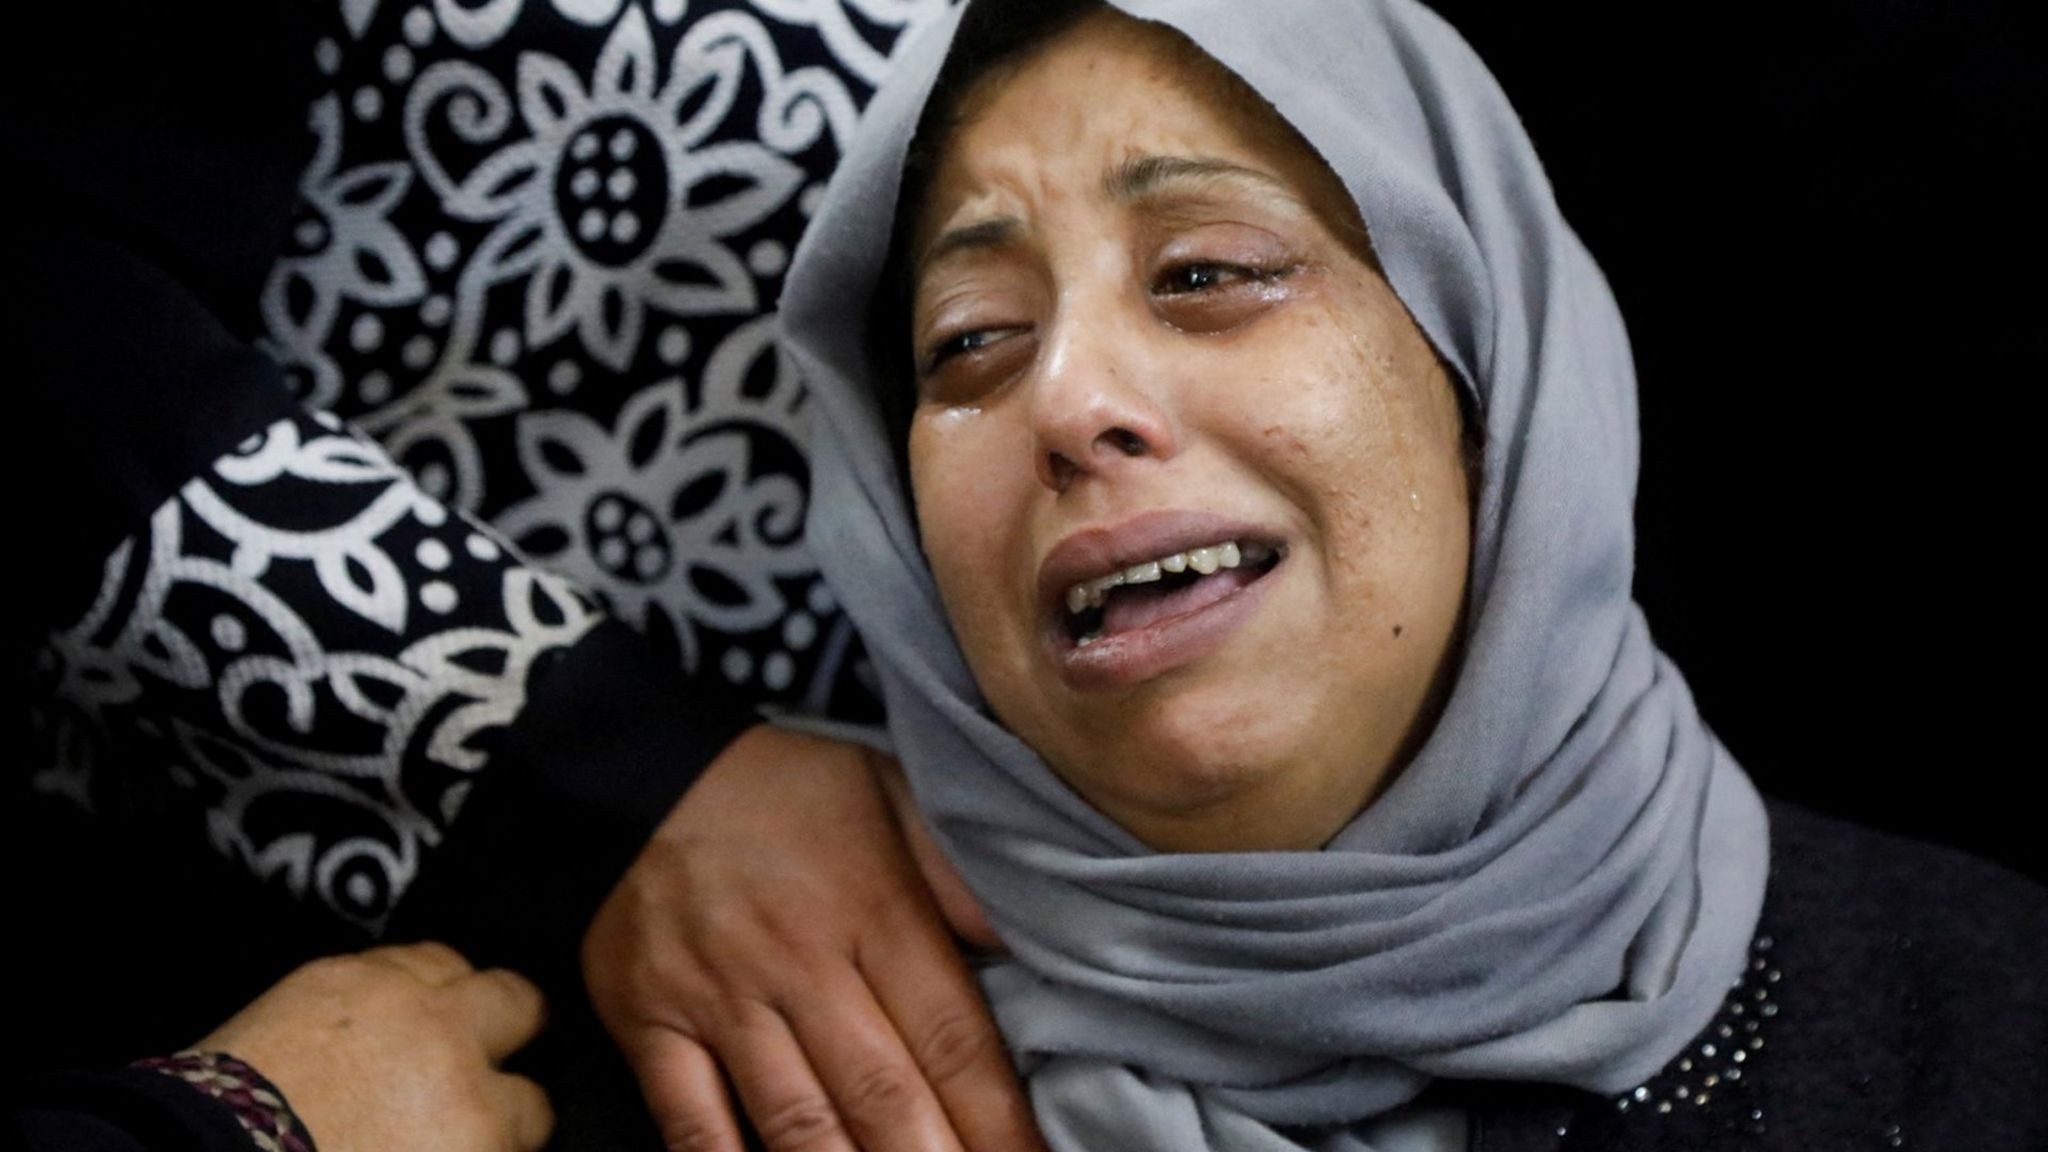 A woman reacts during the funeral of Palestinian Waseem Khalifa, 18, who was killed by Israeli forces during clashes in a raid, in Balata Camp in the Israeli-occupied West Bank, August 18, 2022. REUTERS/